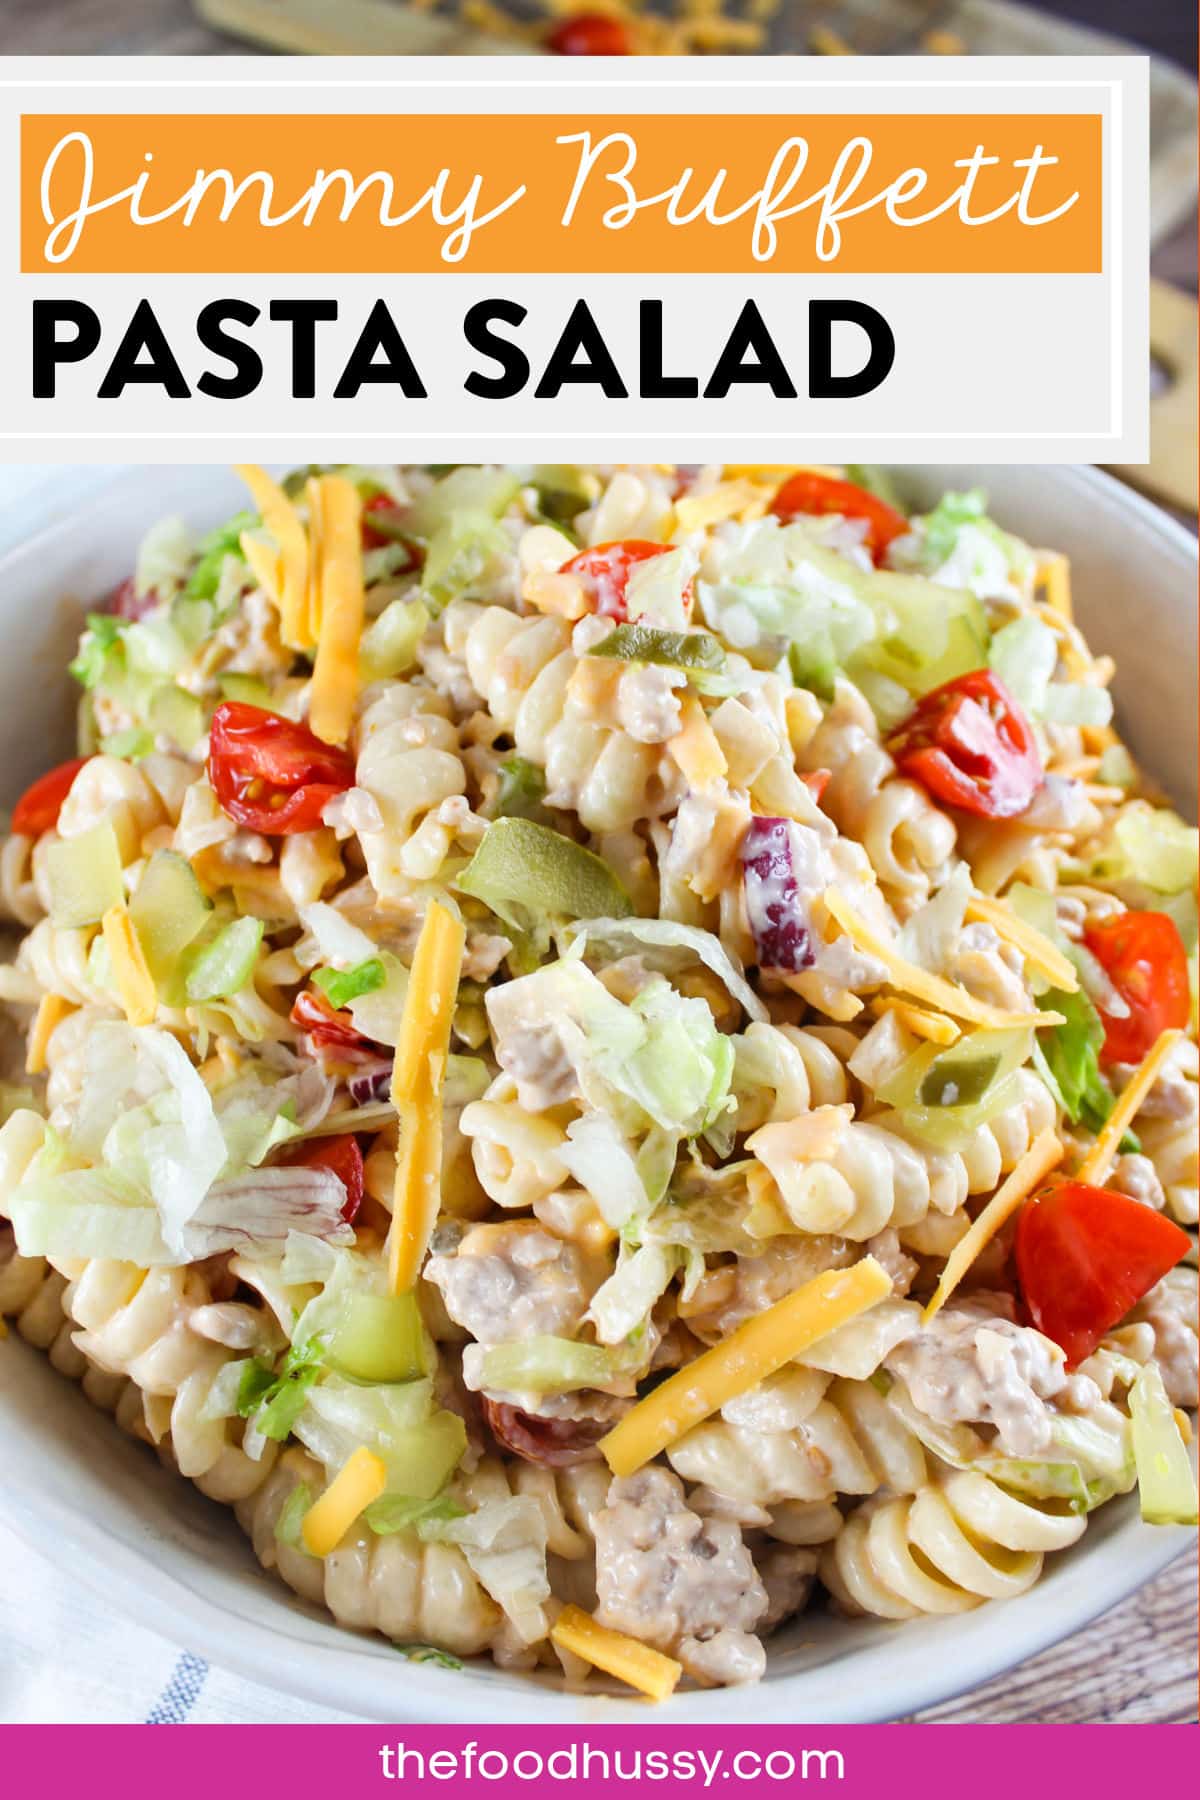 Jimmy Buffett Pasta Salad is a delicious main course or side dish! Filled with everything you love about a cheeseburger: burger, pickles, cheese, onions and more! Whether you're wanting a fun dinner or a perfect potluck dish - this is it!
 via @foodhussy